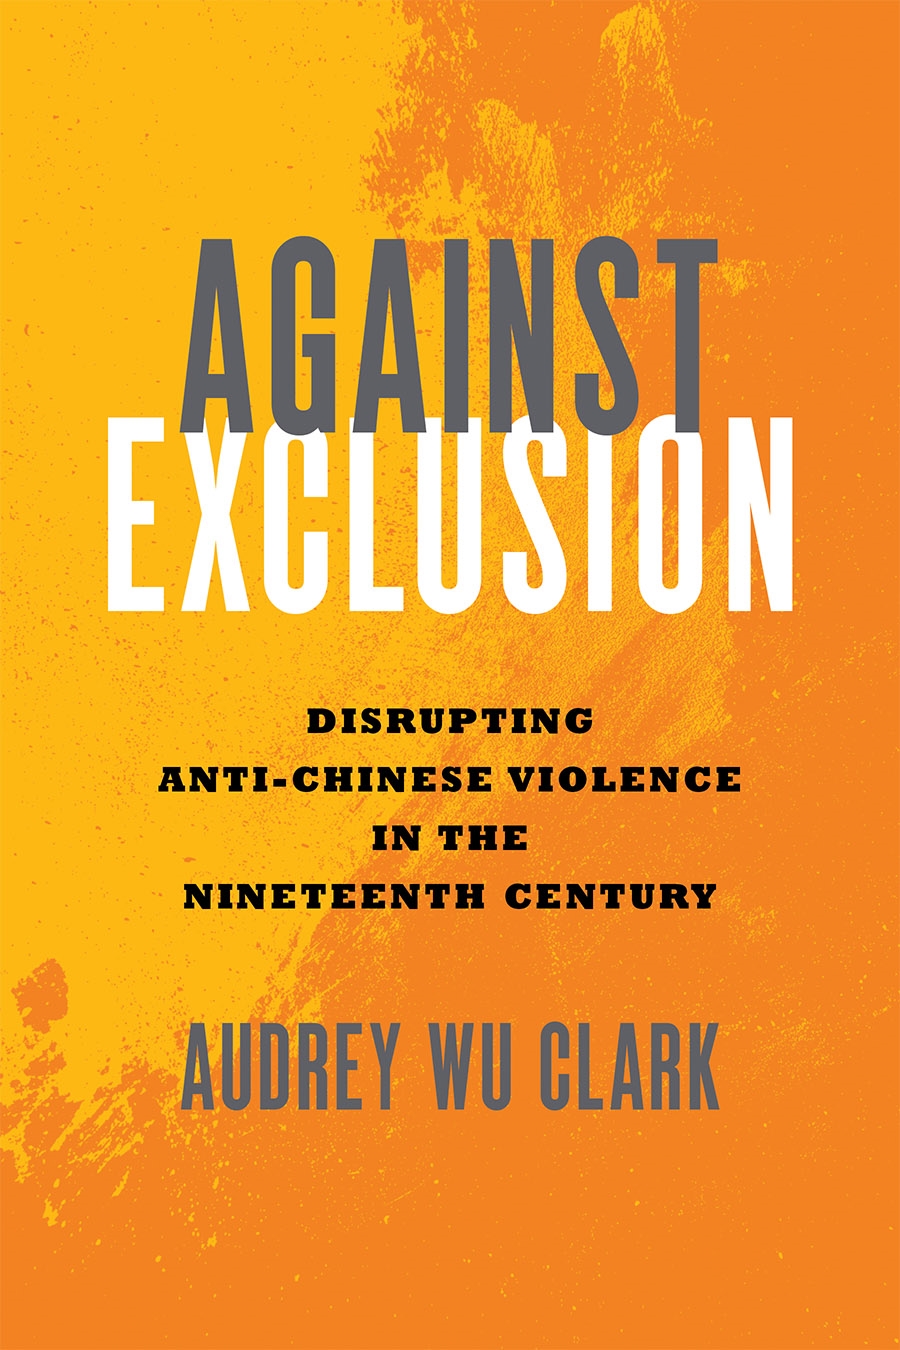 Front cover of Against Exclusion: Disrupting Anti-Chinese Violence in the Nineteenth Century by Audrey Wu Clark, featuring the book's title and subtitle against an orange-yellow background.